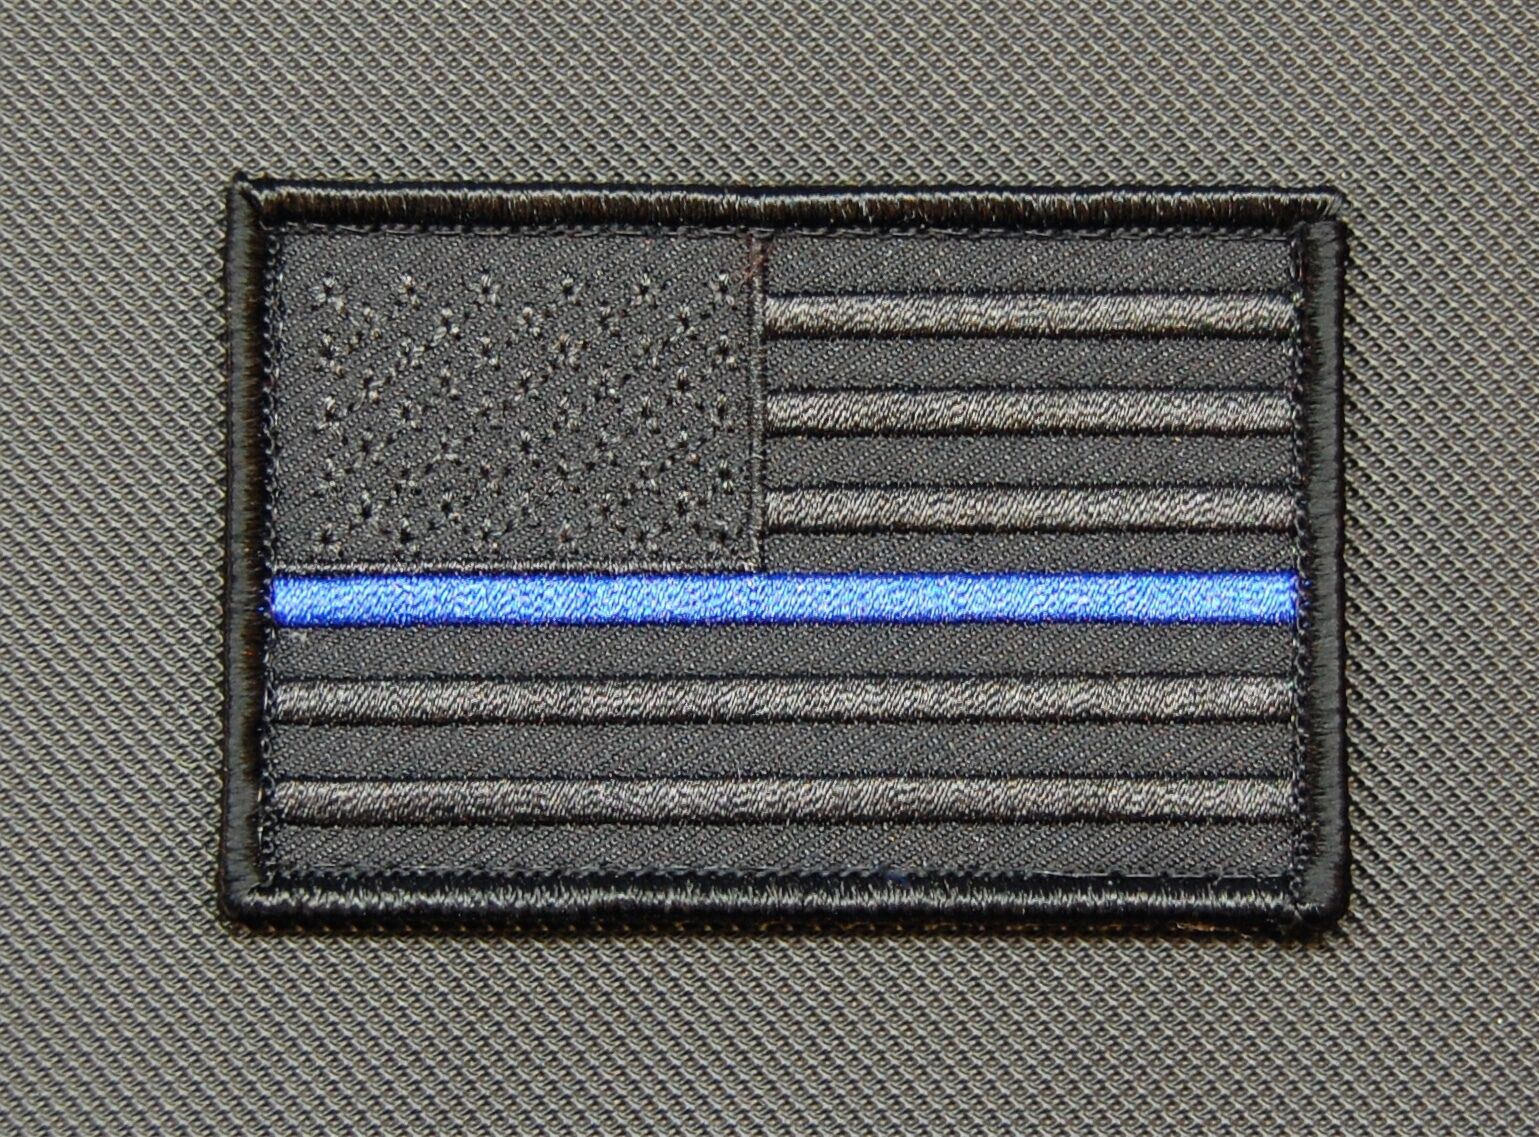 Blackout Thin Blue Line United States Flag Patch Police Swat Gang Hook Backing